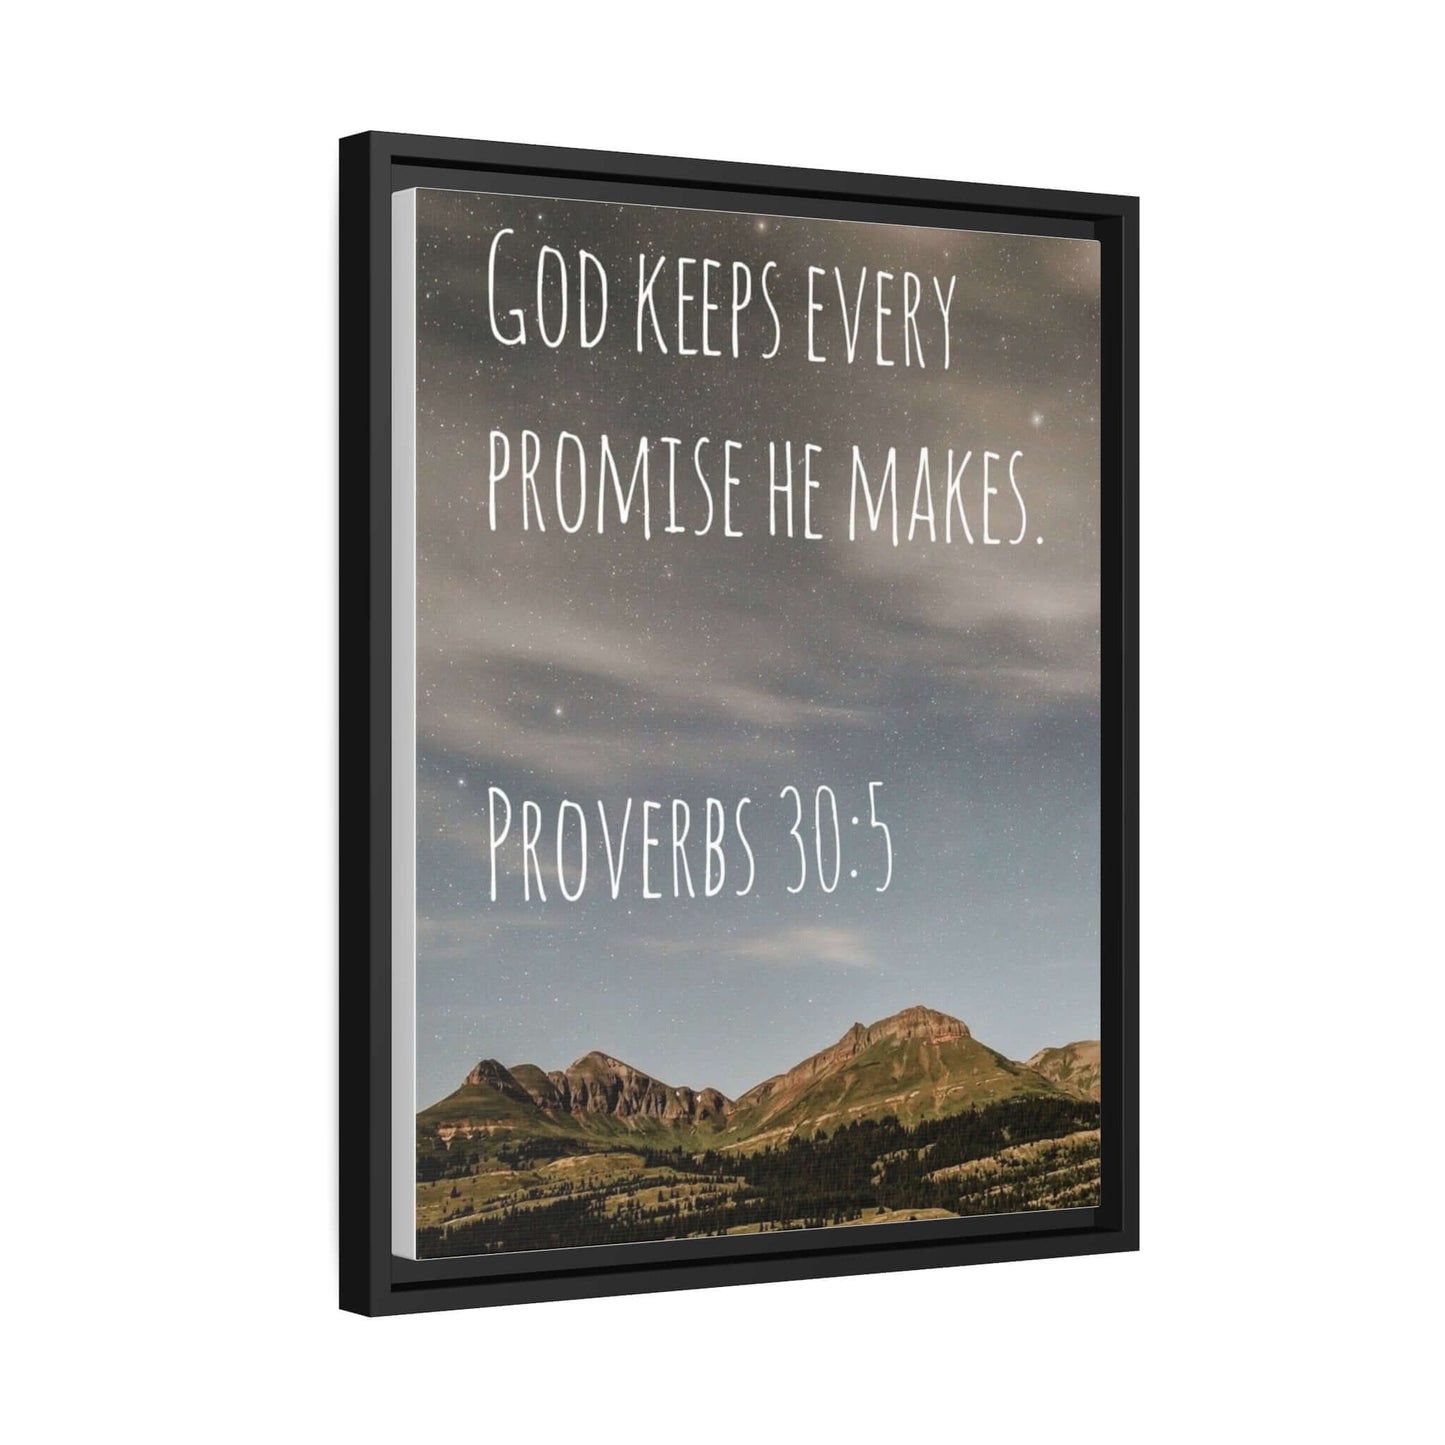 Canvas Print Framed with Black Pinewood – Eco-Friendly Art with Bible Verse | Art & Wall Decor,Canvas,Decor,Eco-friendly,Framed,Hanging Hardware,Home & Living,Summer Picks,Sustainable